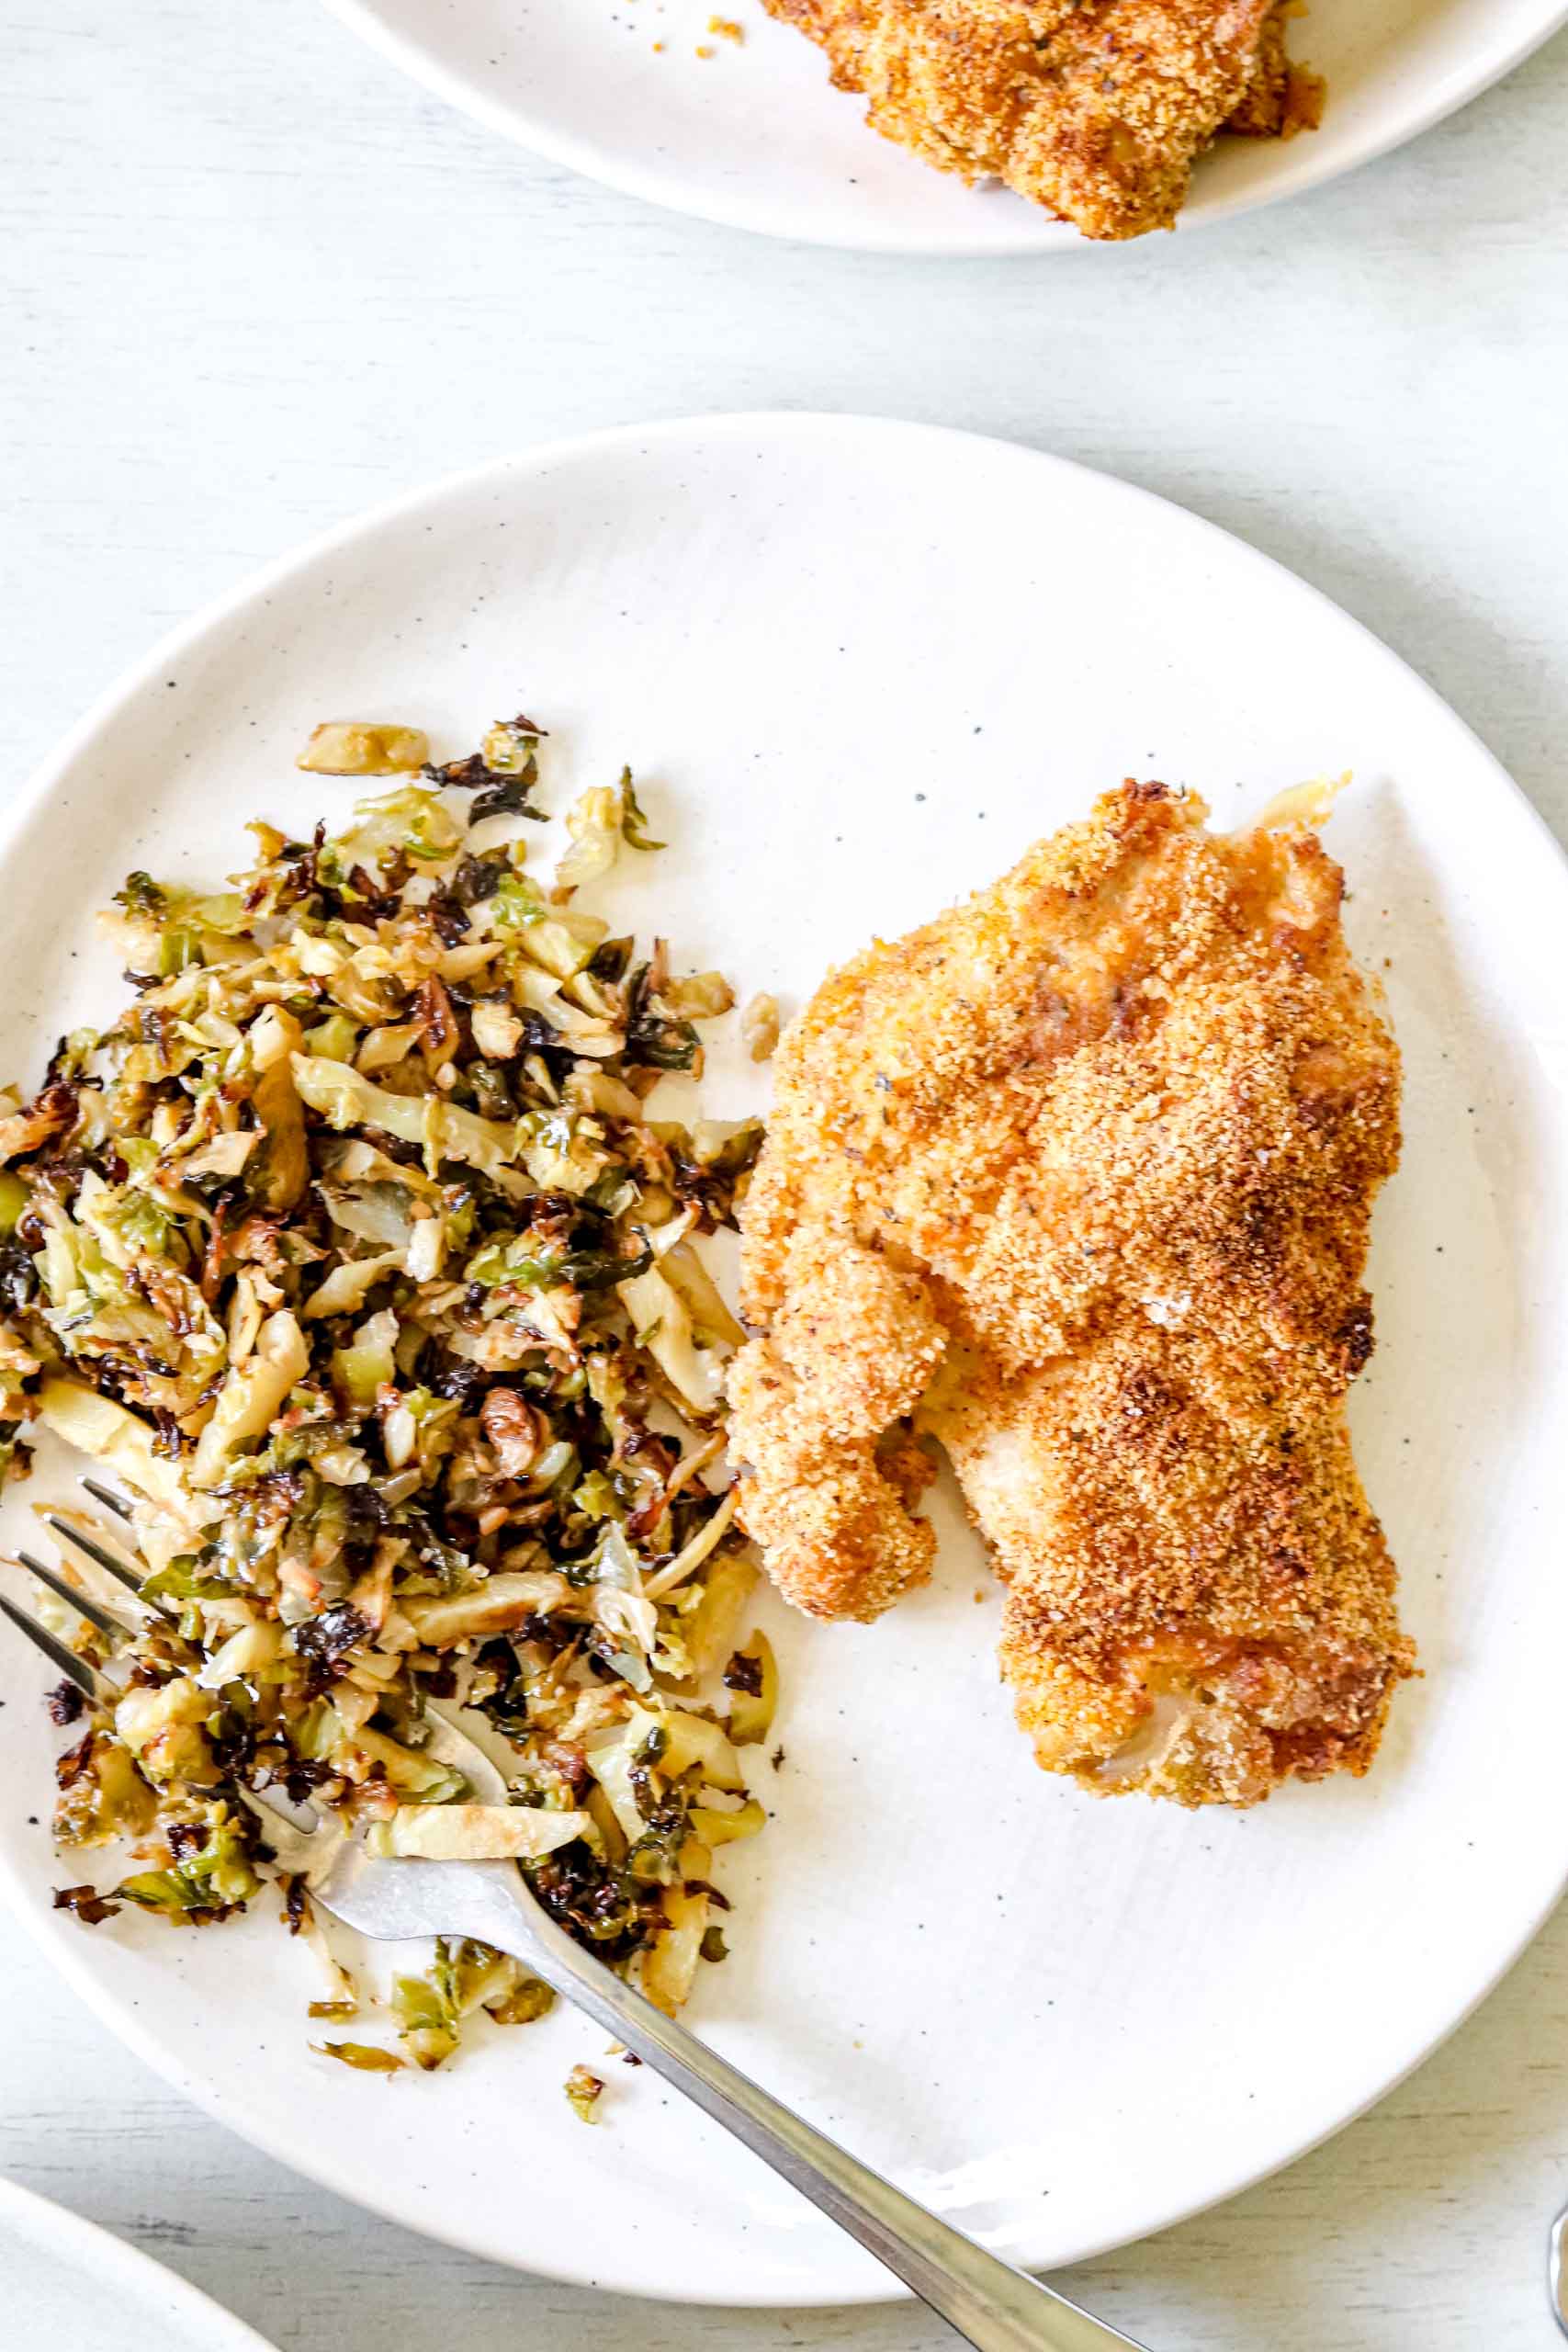 Whole 30 Air-fryer Chicken Thigh Almond flour mixture in a bowl. Image of Whole30 Air-fryer  chicken thigh on a round white plate with onion and garlic Brussel sprouts. https://www.atwistedplate.com/whole30-air-fryer-chicken-thighs/